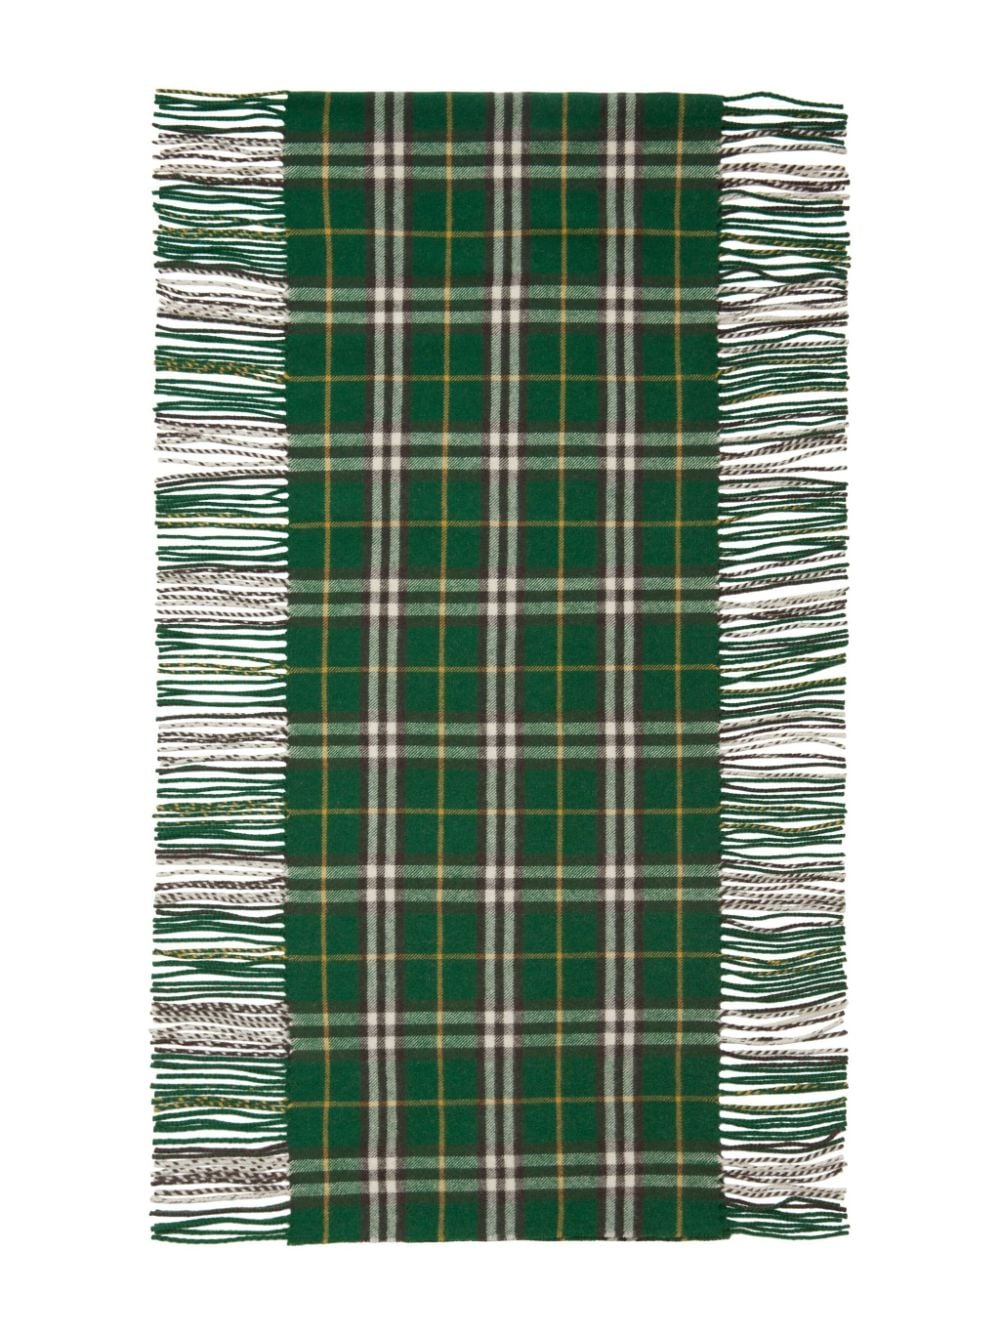 BURBERRY Green Checkered Cashmere Scarf with Fringed Edges